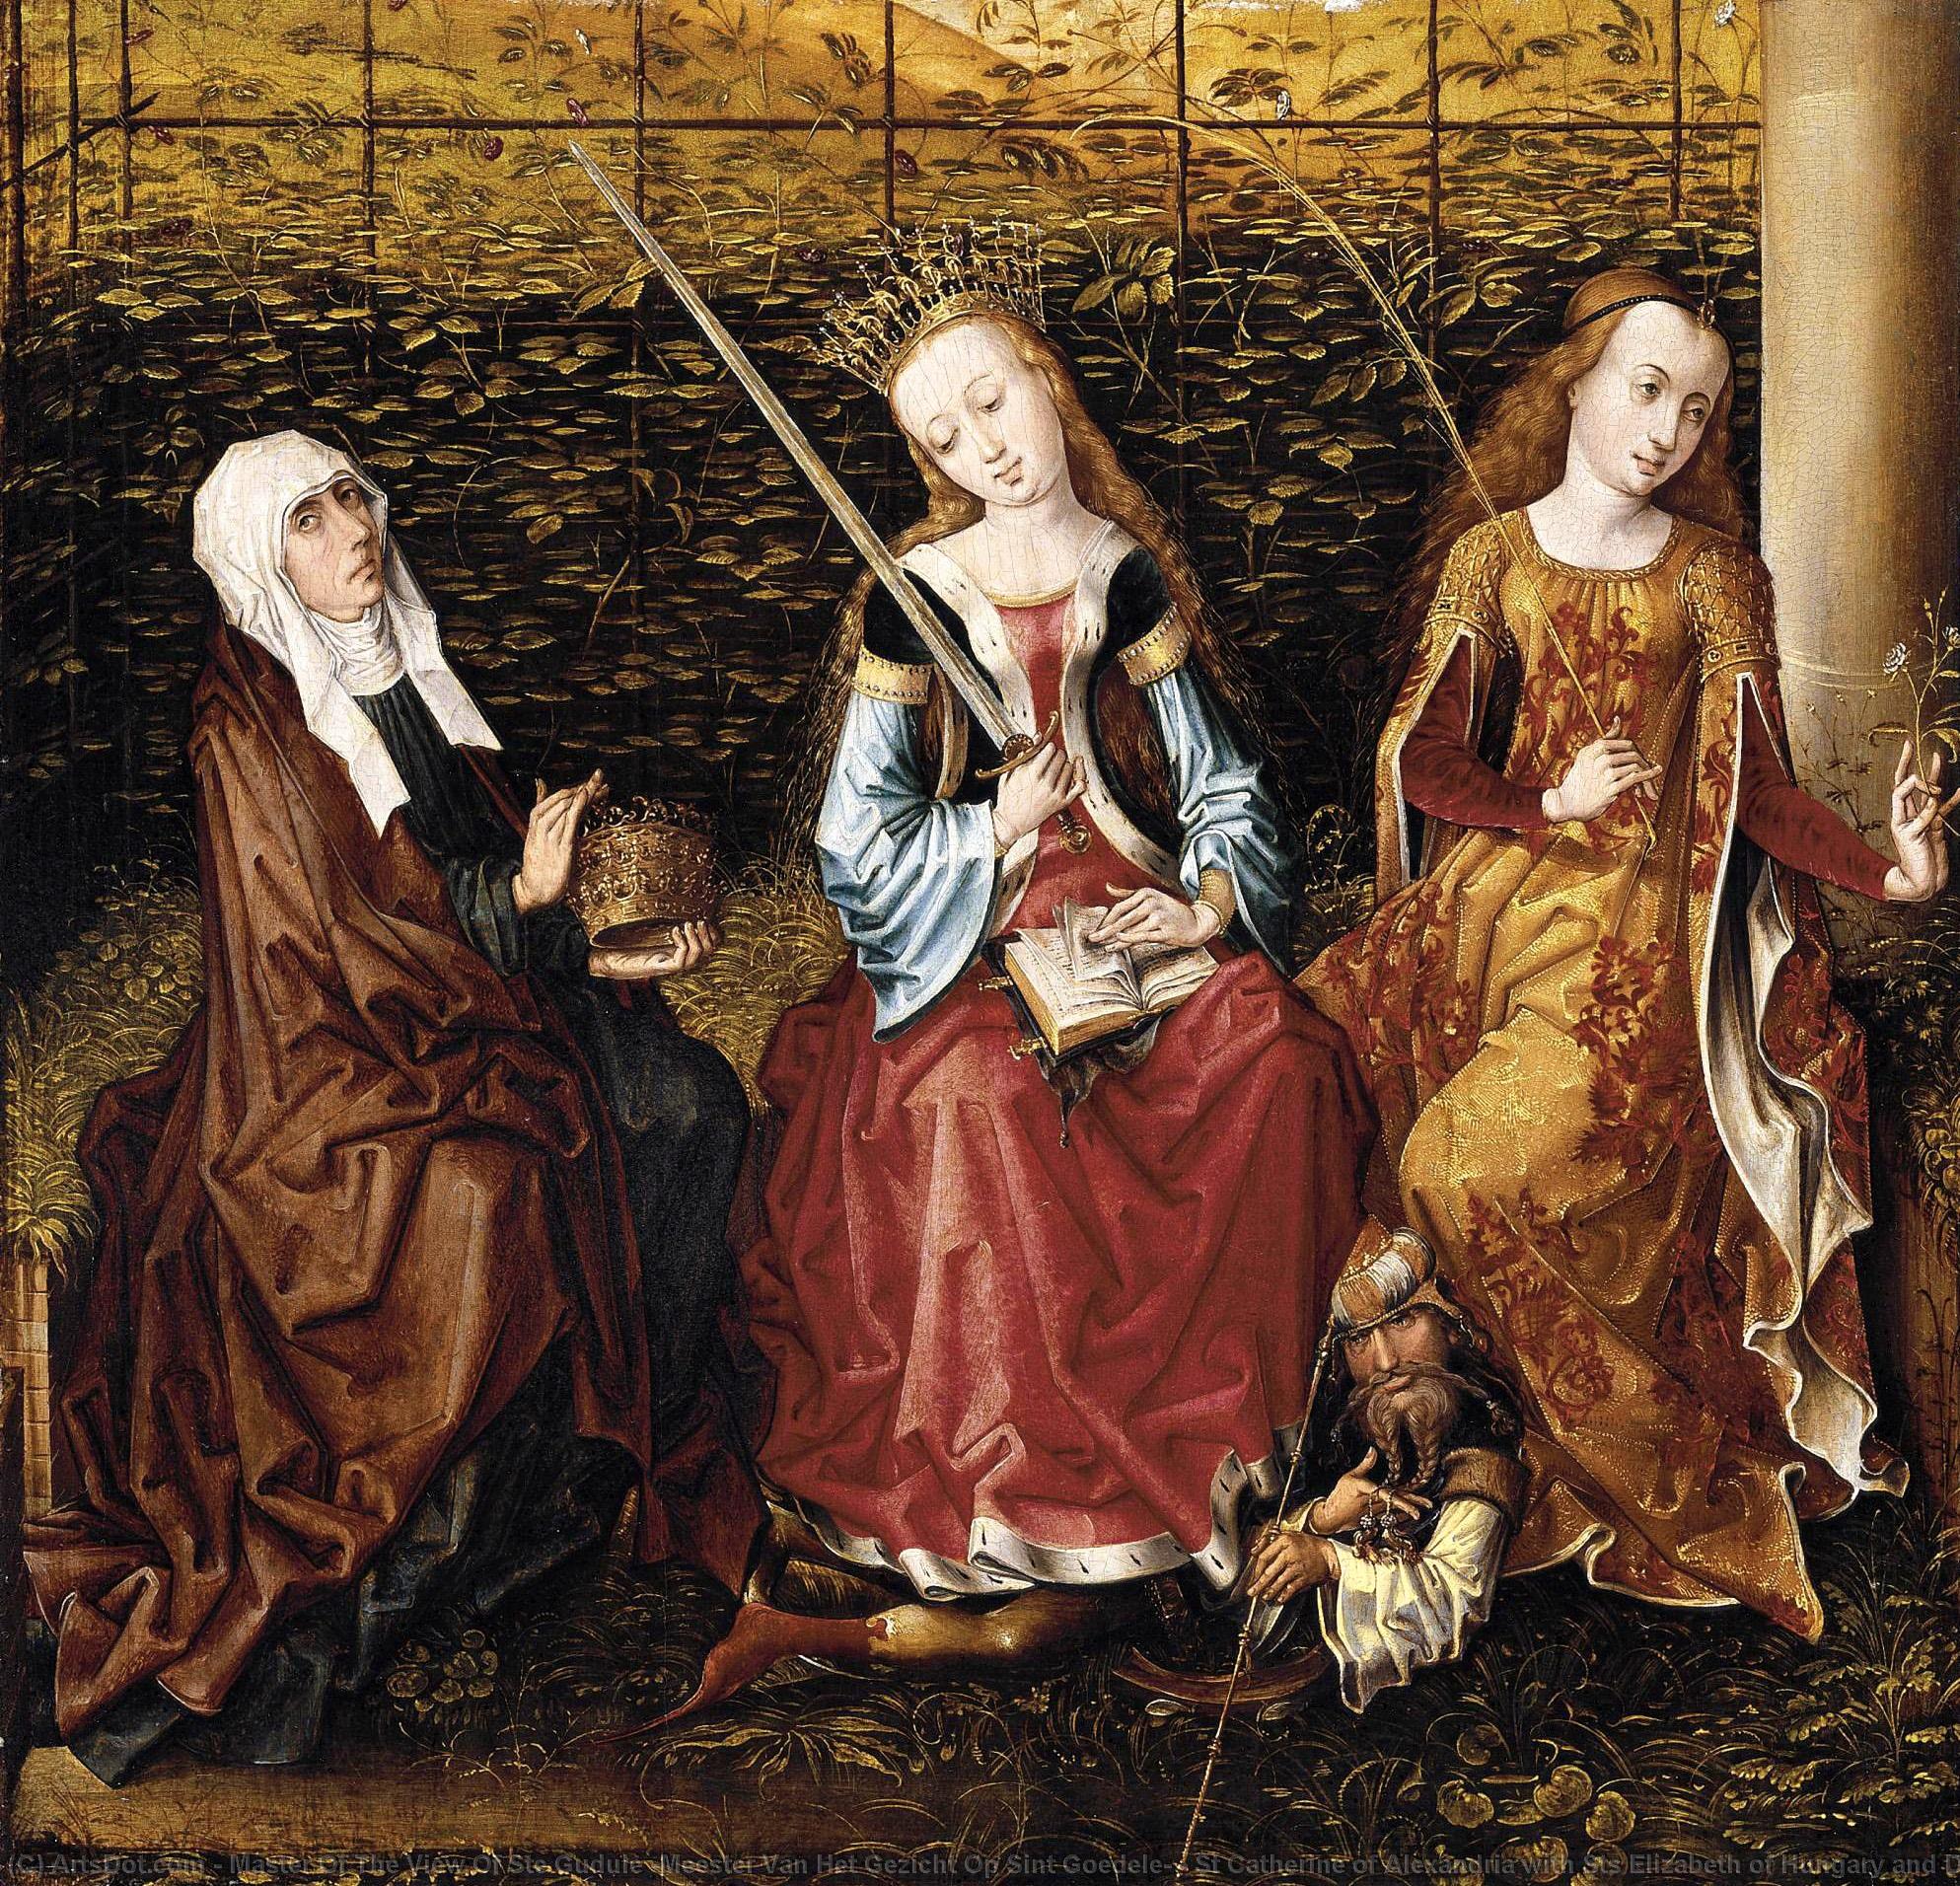 St Catherine of Alexandria with Sts Elizabeth of Hungary and Dorothy, 1480 by Master Of The View Of Ste Gudule (Meester Van Het Gezicht Op Sint Goedele) Master Of The View Of Ste Gudule (Meester Van Het Gezicht Op Sint Goedele) | ArtsDot.com